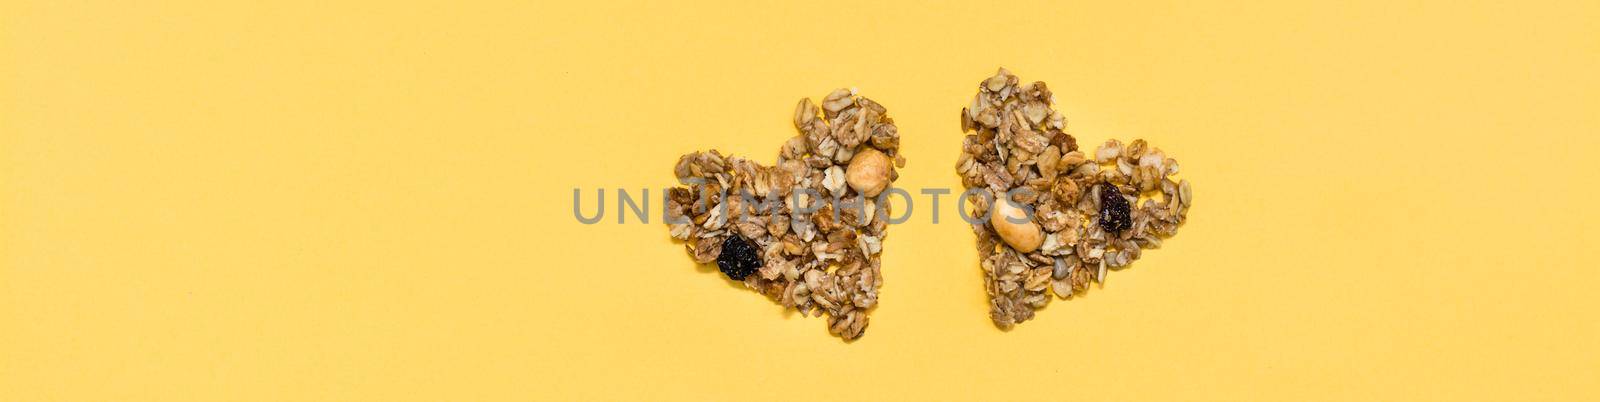 Love for healthy food. Granola made from oats, nuts and raisins in the form of two hearts on a yellow background. Top view. Web banner